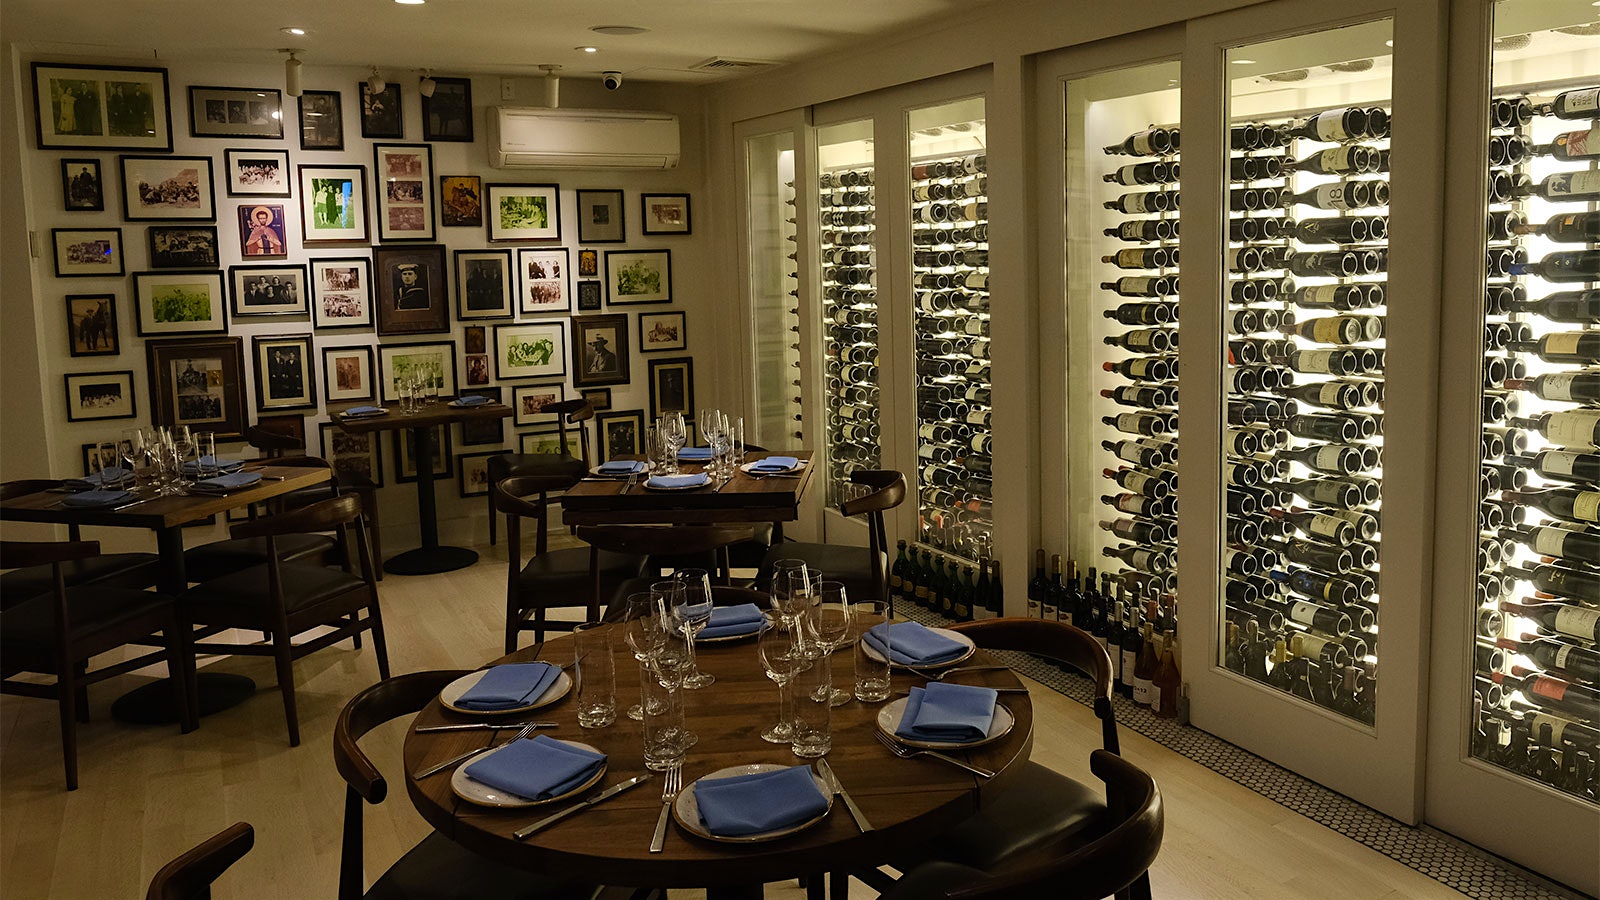  A view of the dining room at Molyvos' new location in Hell's Kitchen, with wine prominently displayed and artwork and ceramic plates on the walls